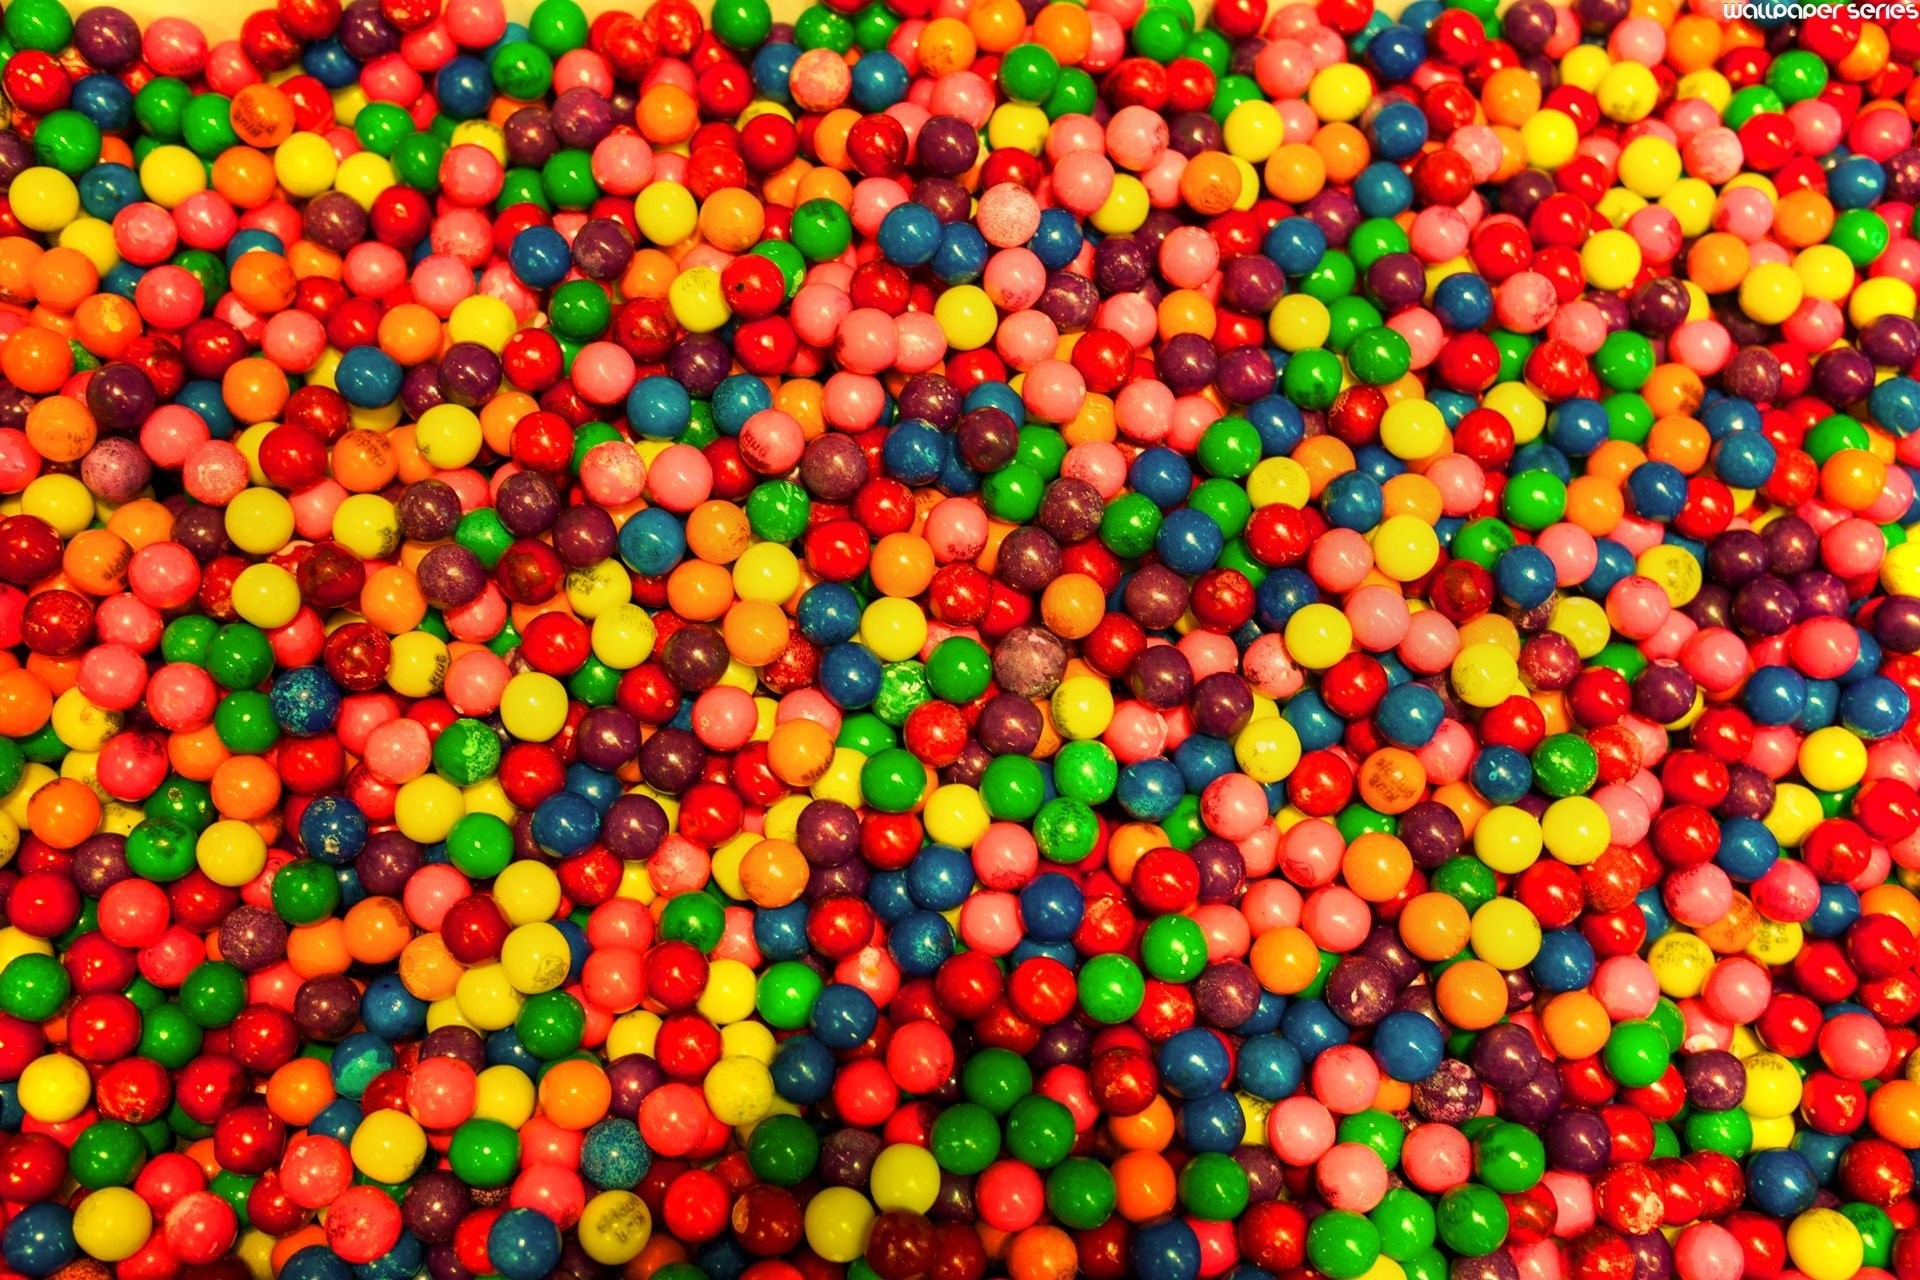 Candy Wallpaper Download Free Cool High Resolution Wallpapers For Desktop Mobile Laptop In